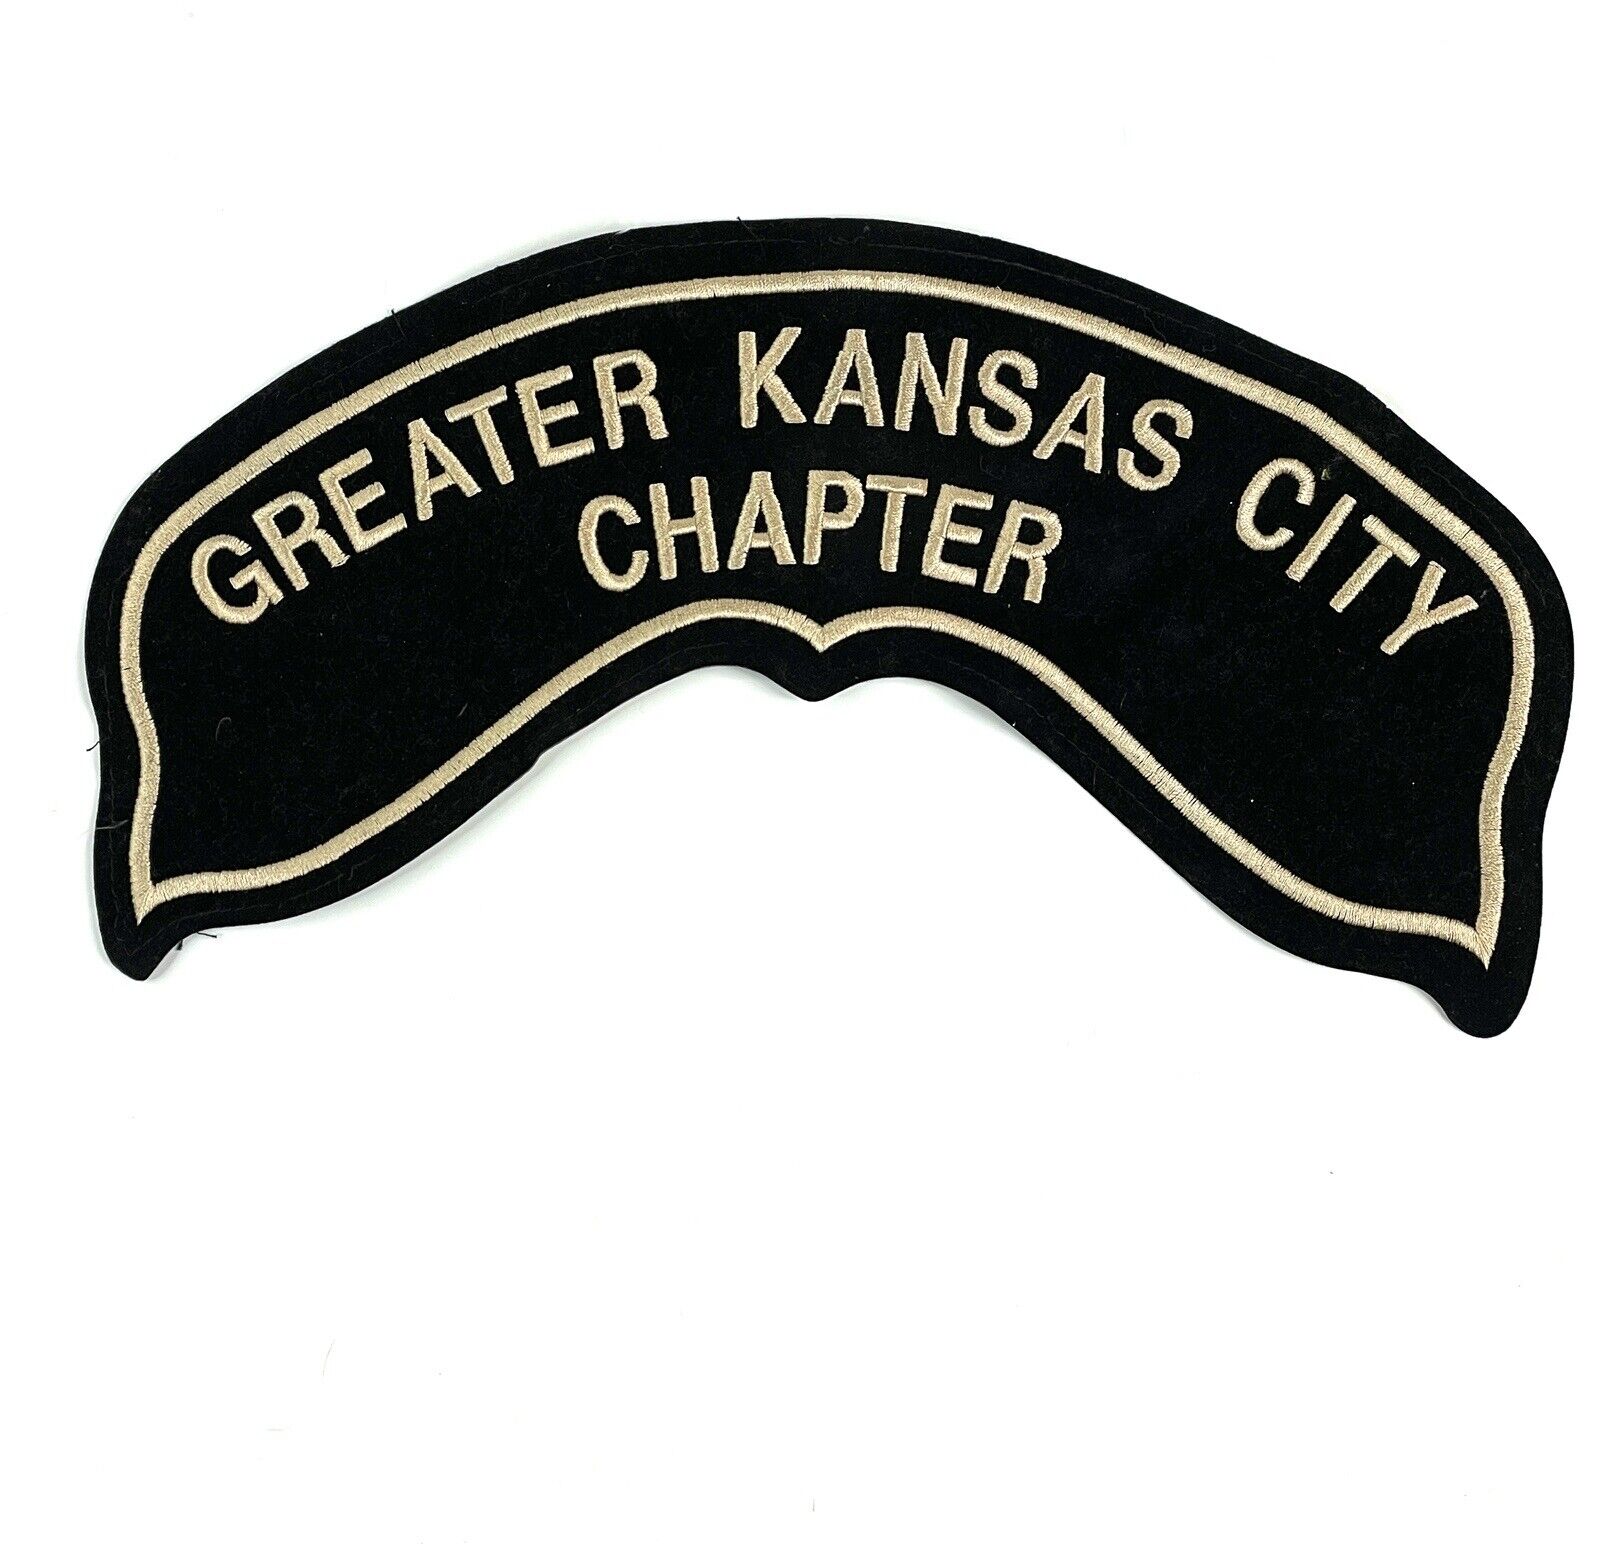 Greater Kansas City Chapter Motorcycle Rider Club Group Embroidered Patch 12”x4”